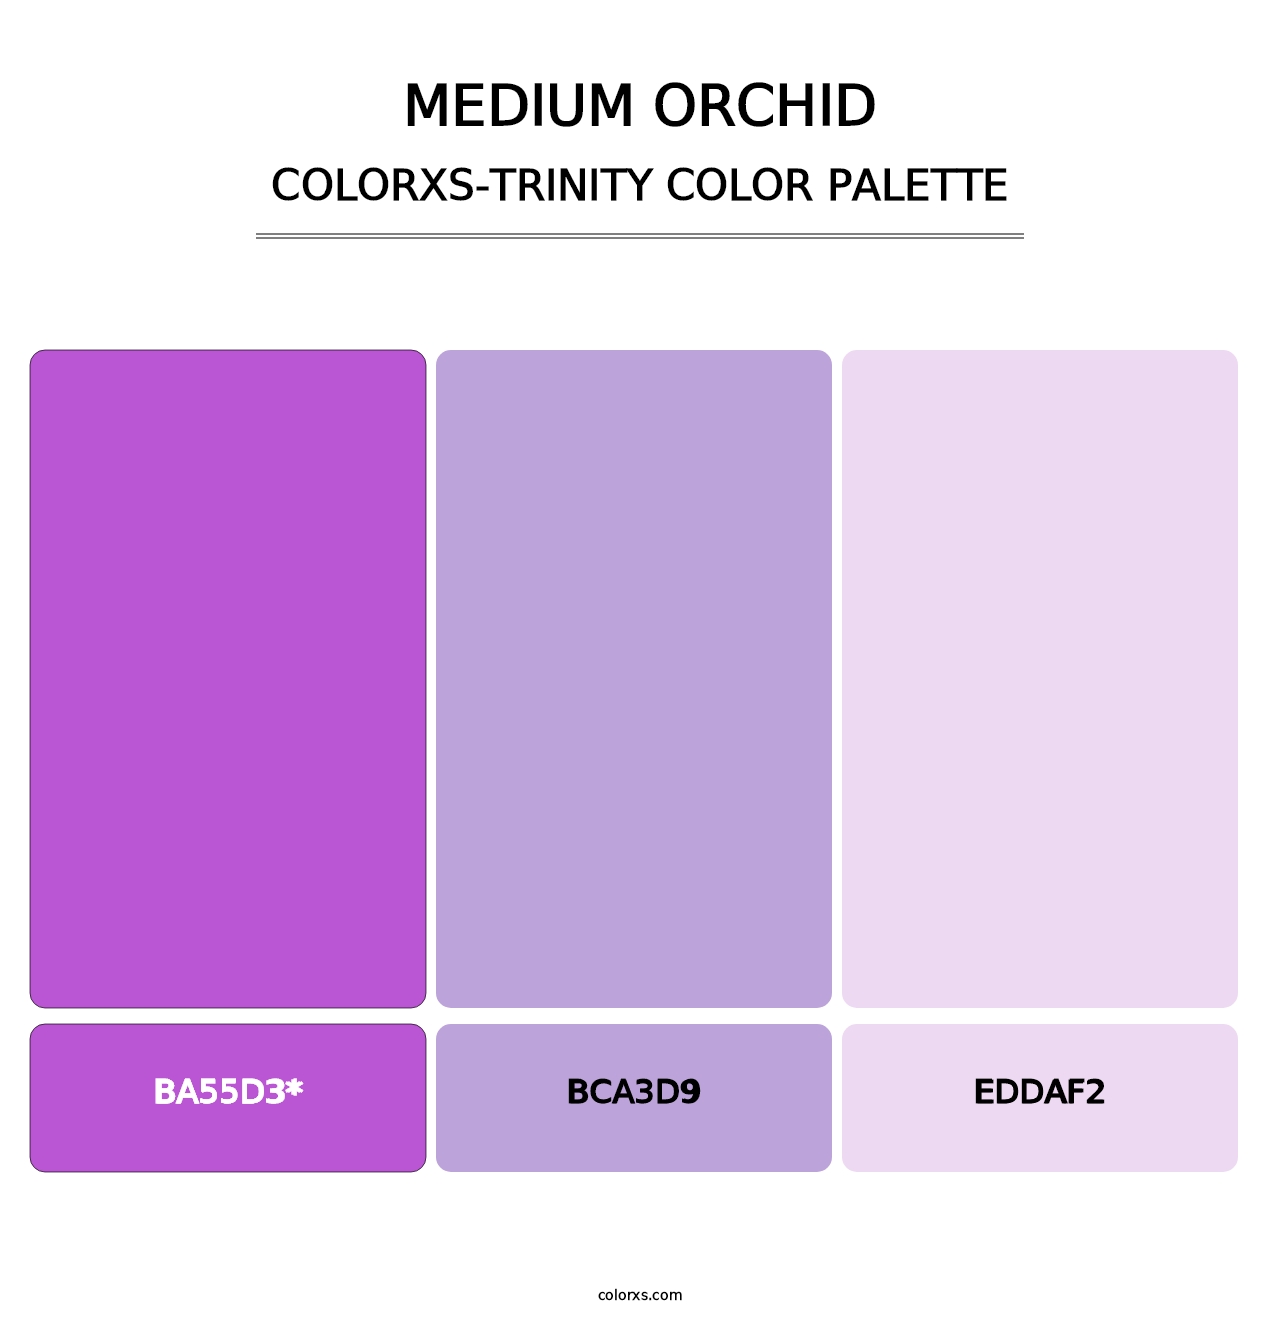 Medium Orchid - Colorxs Trinity Palette